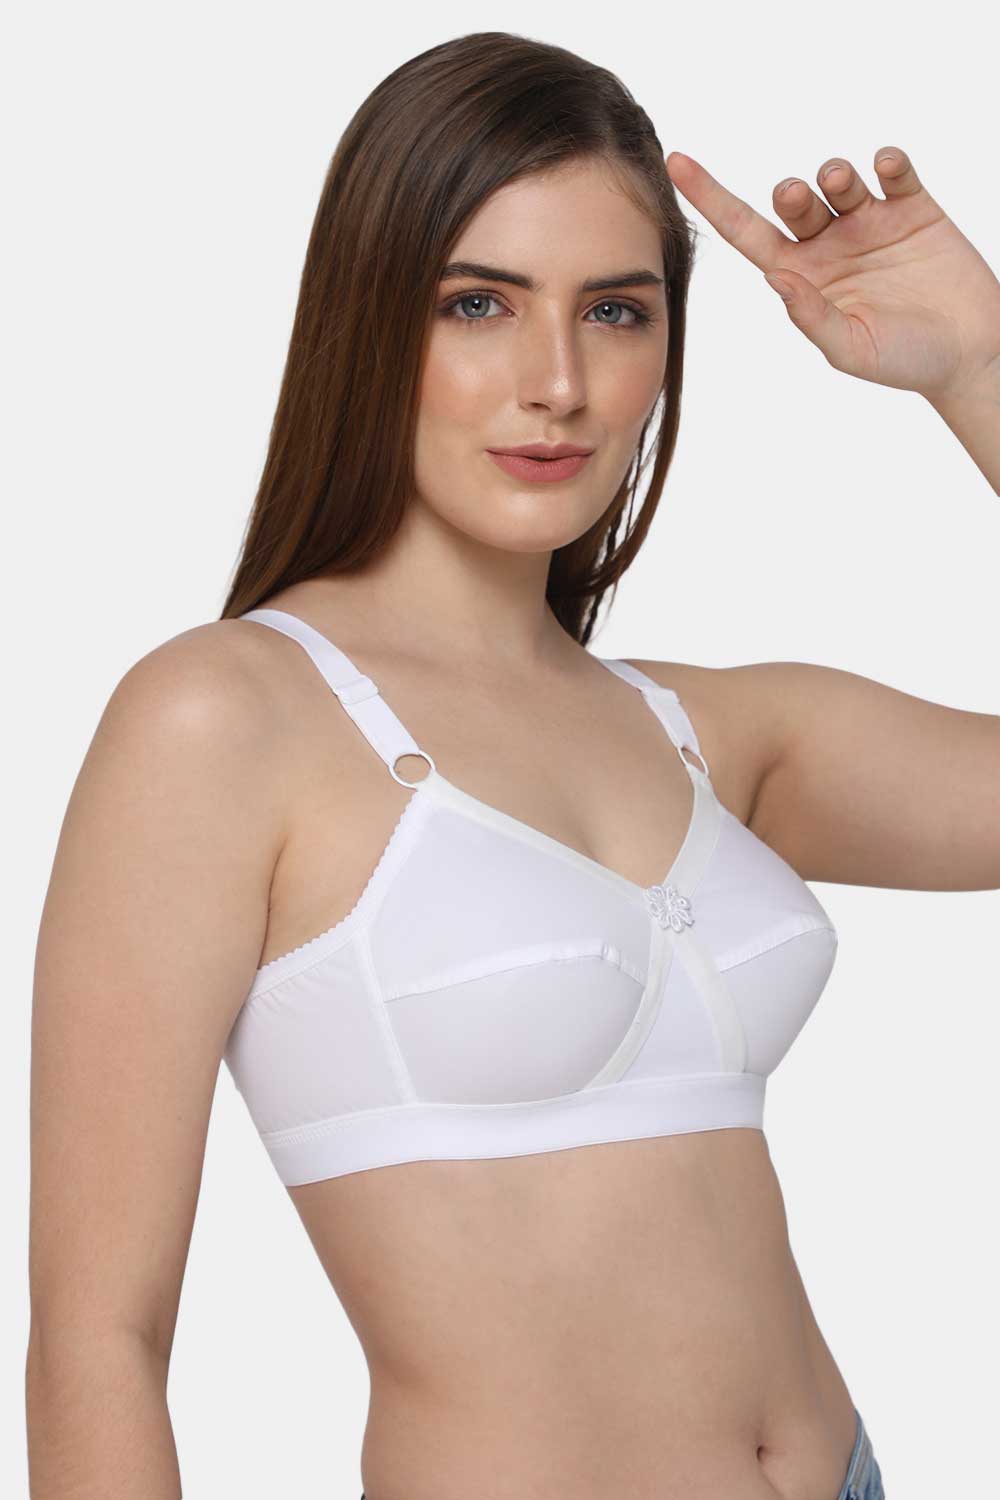 Naidu Hall Bra for Women | Non-Padded | Non-Wired | Cotton Bra for Women  Daily use | Everyday Bra for Women | Criss-Cross Neck Line | Full Coverage